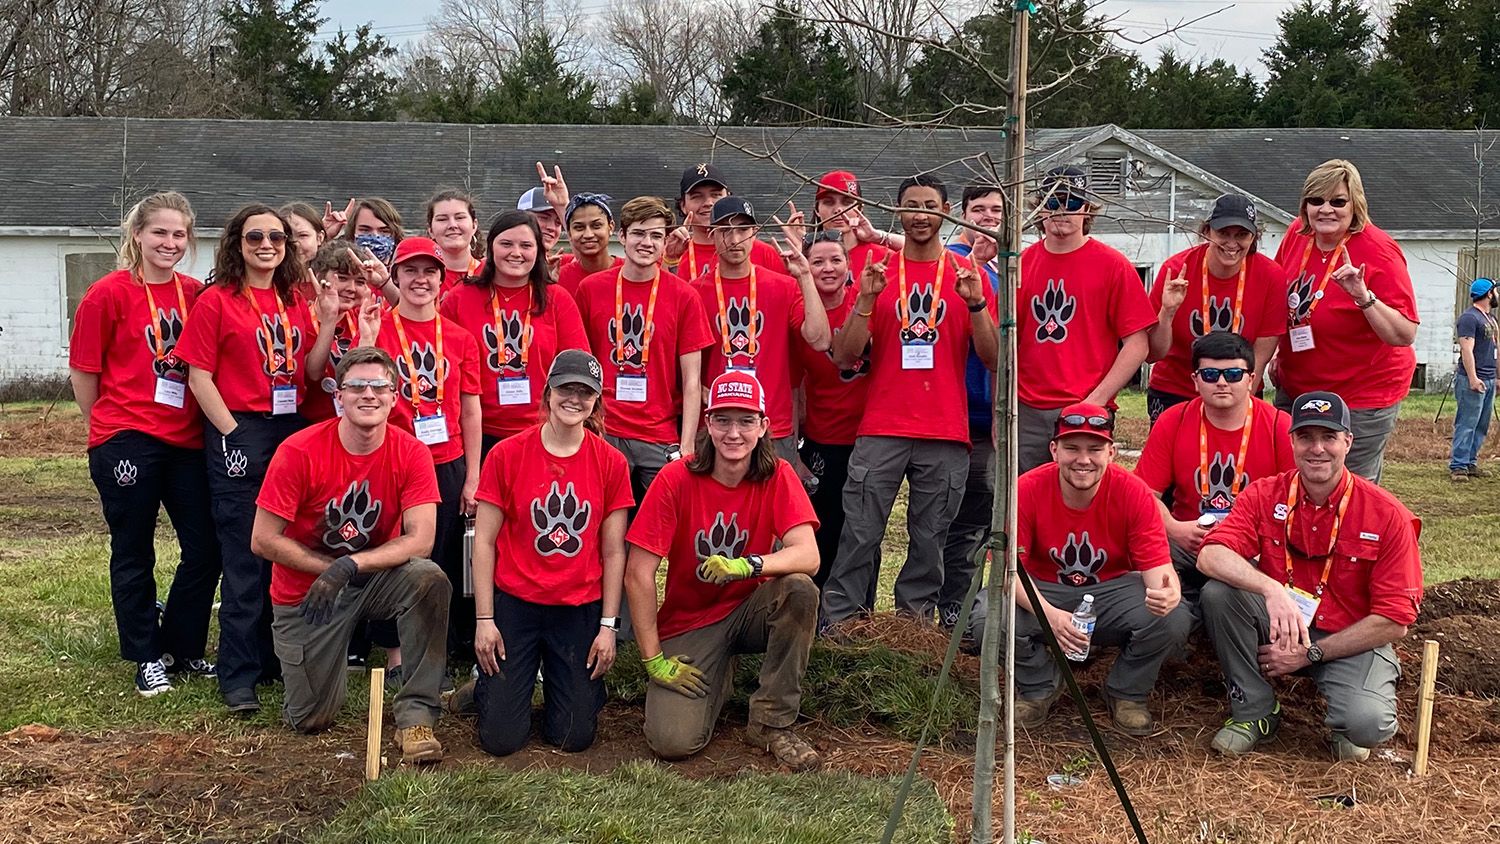 2022 HortPack team photo at National Collegiate Landscape Competition hosted at NC State.